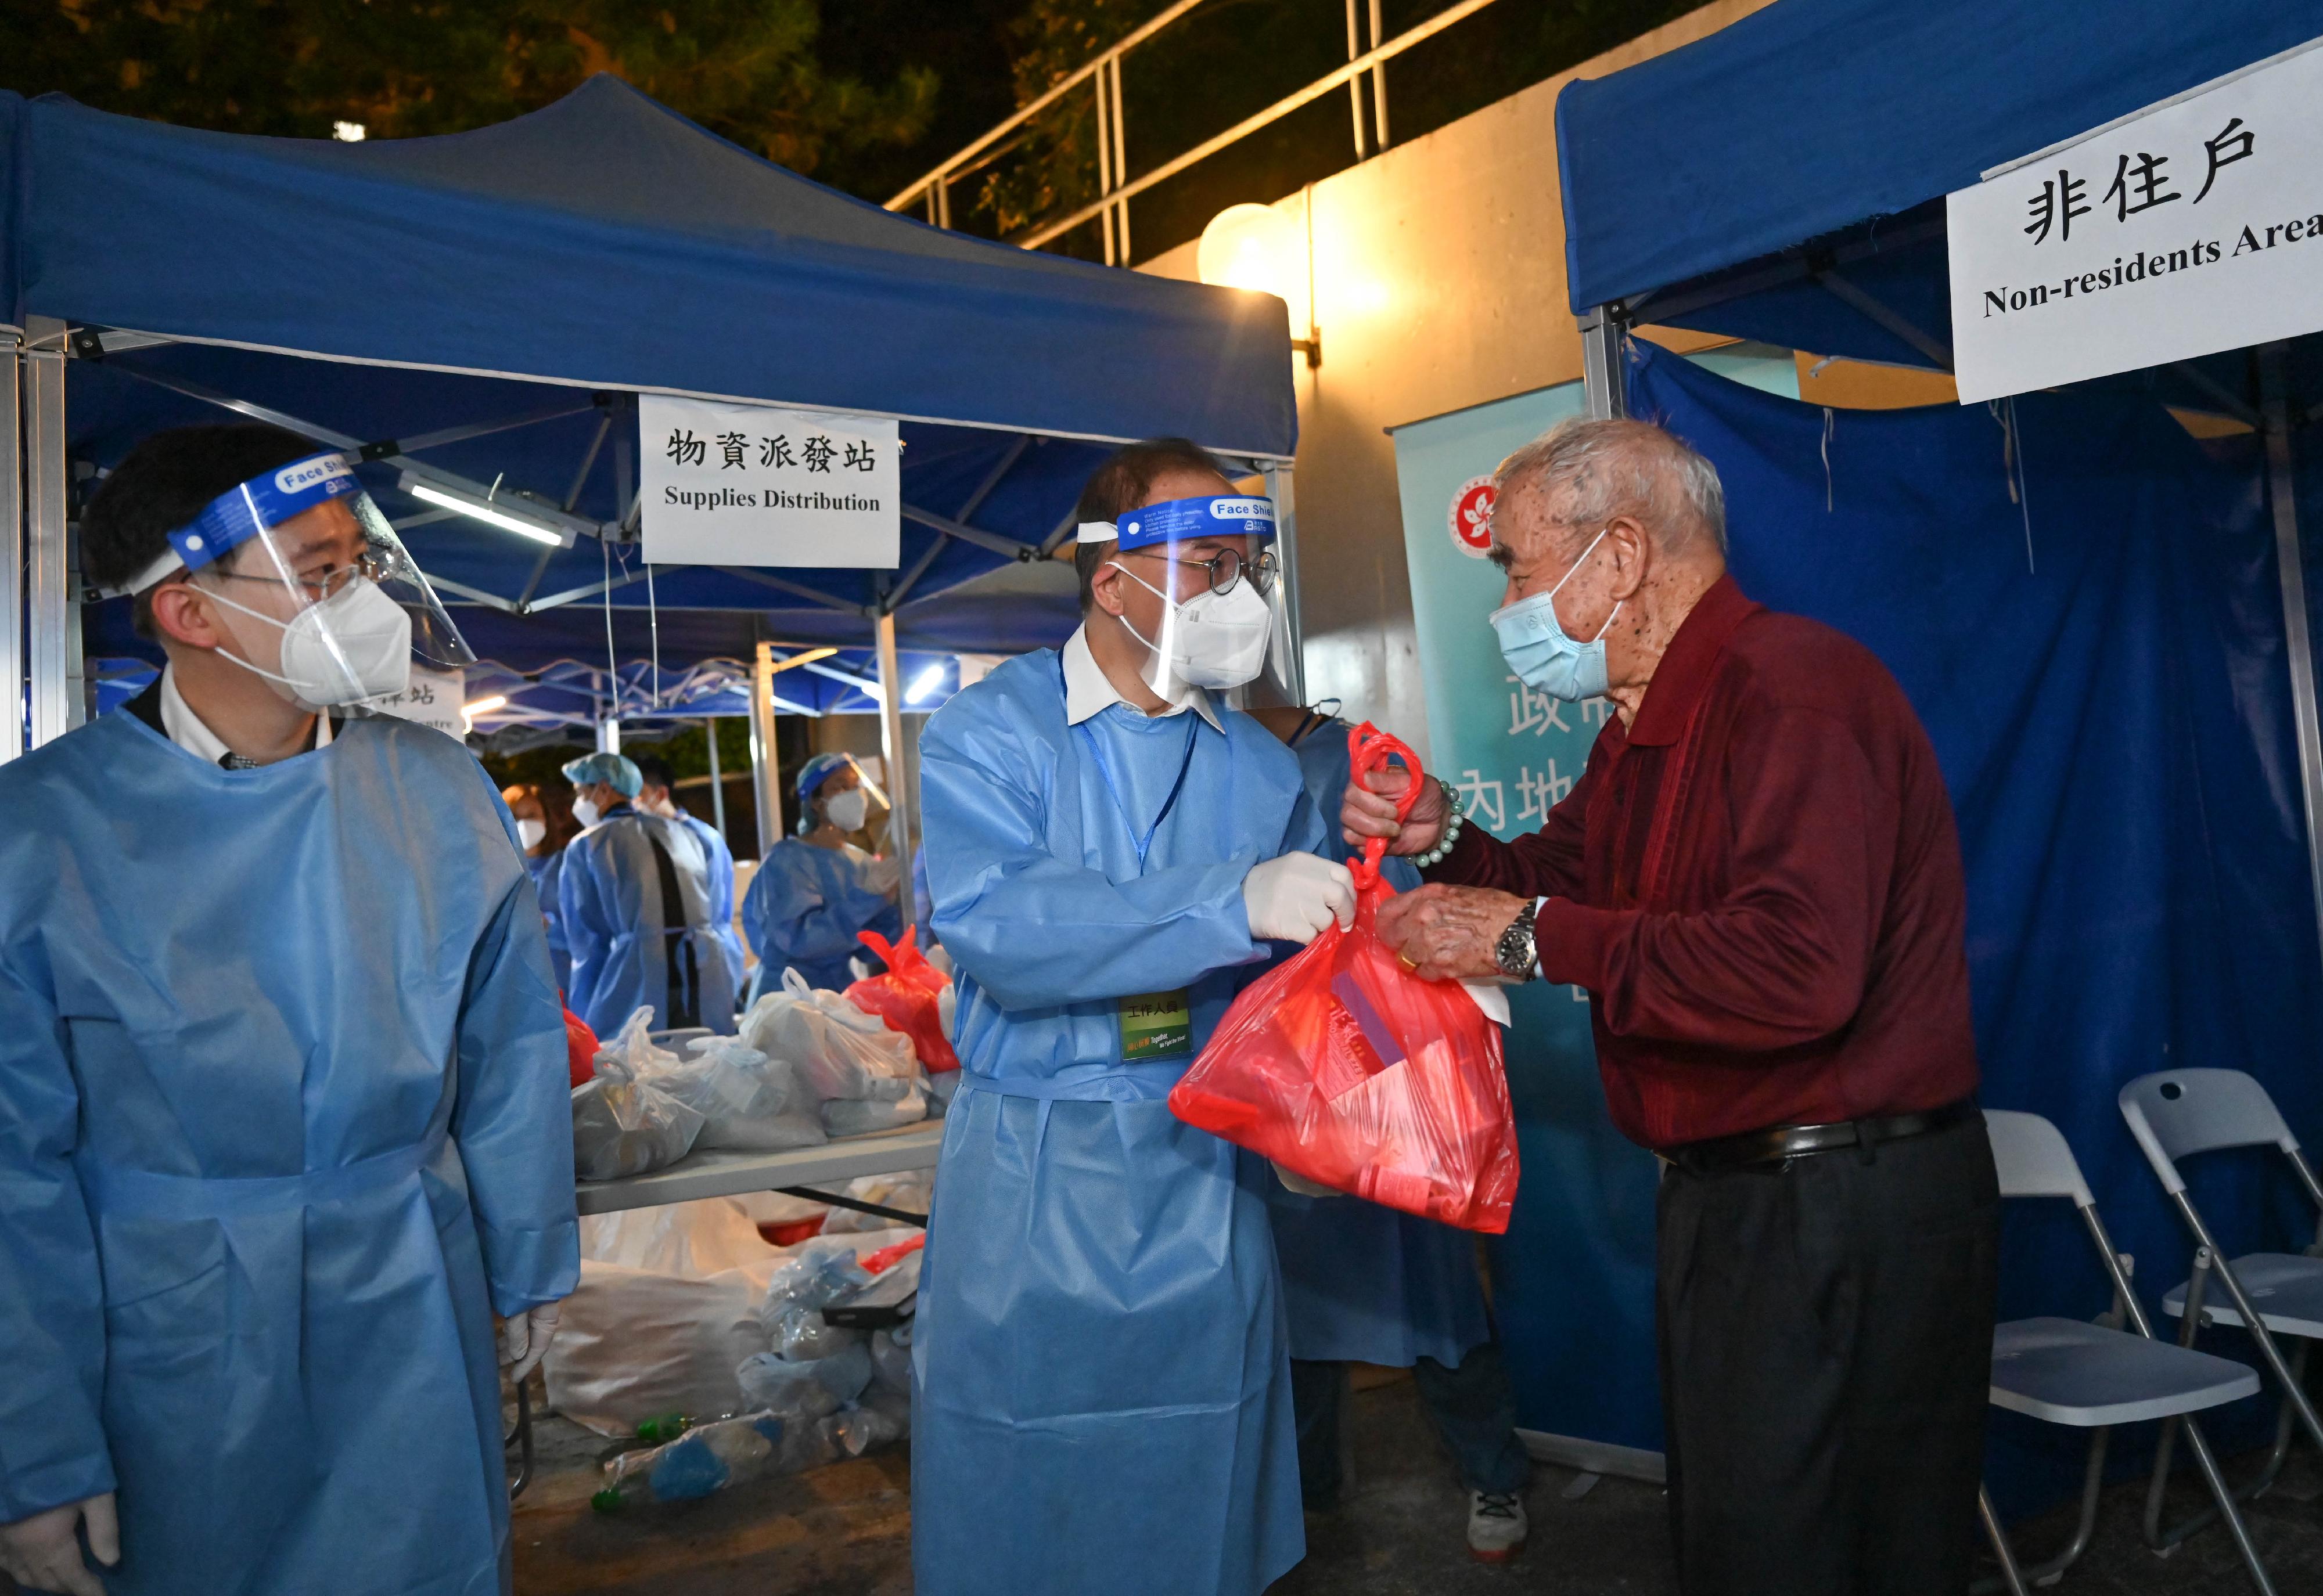 The Secretary for Constitutional and Mainland Affairs, Mr Erick Tsang Kwok-wai, leading an anti-epidemic team formed by about 100 colleagues from the bureau and its department, commenced the "restriction-testing declaration" operation in Block 10, Tsui Chuk Garden, Wong Tai Sin, last night (April 13). Photo shows Mr Tsang (centre), and the Under Secretary for Constitutional and Mainland Affairs, Mr Clement Woo (left), distributing anti-epidemic supplies to a resident subject to compulsory testing.